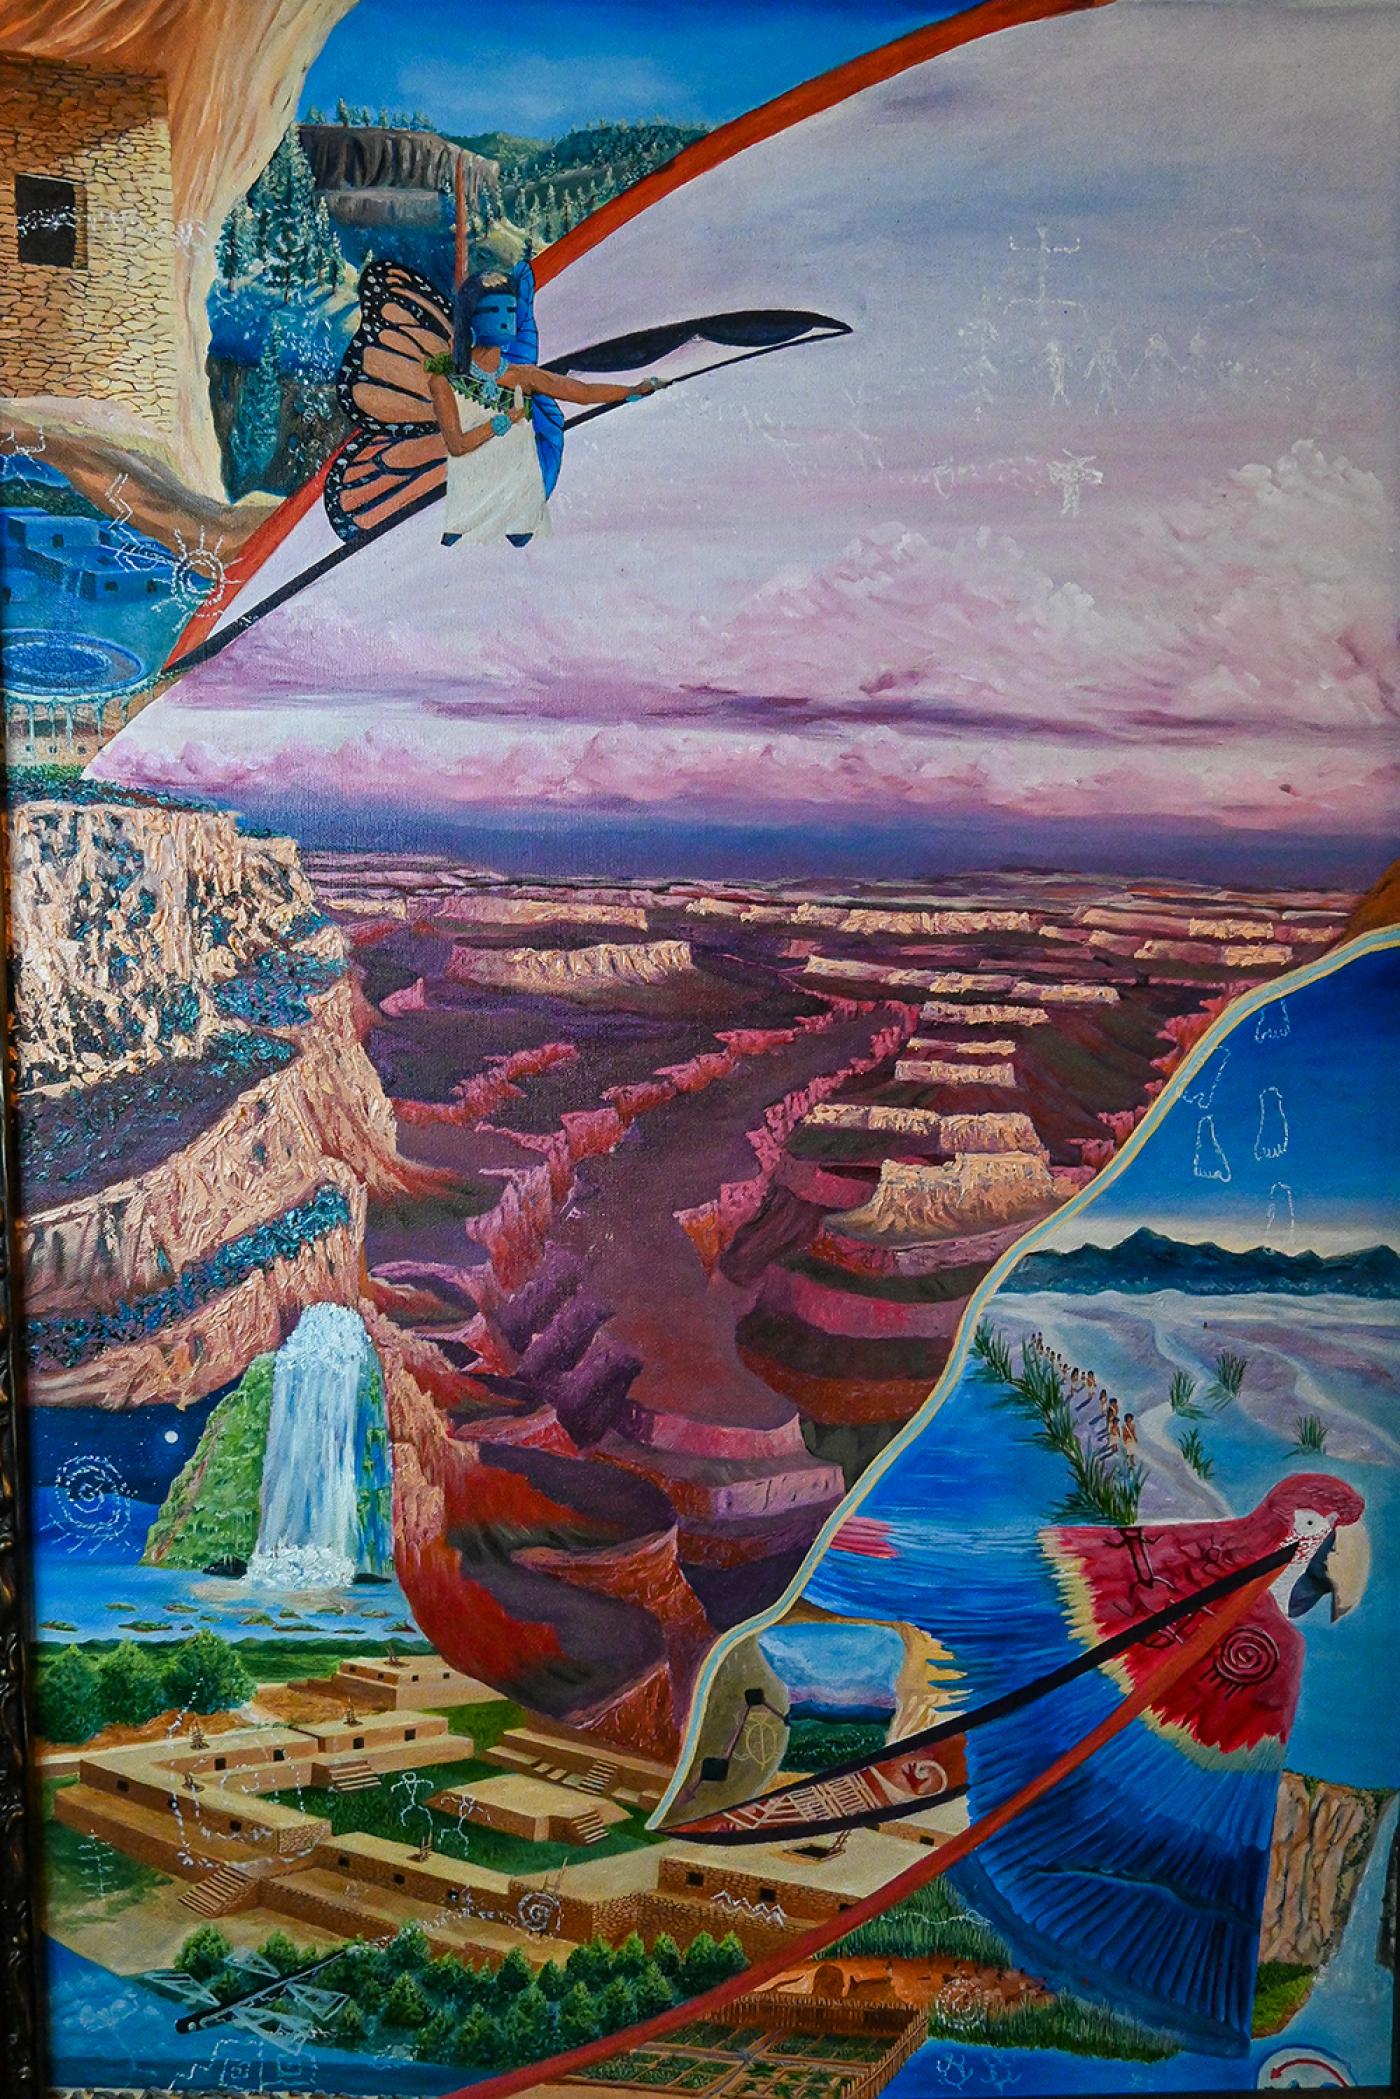 Oil painting of moments in the migration of the Zuni people. In the foreground a kachina and a parrot figure divide the canvas into paneled landscapes of oceans, waterways, forested foothills, the Grand Canyon, and pueblo structures with superimposed petroglyphs. 